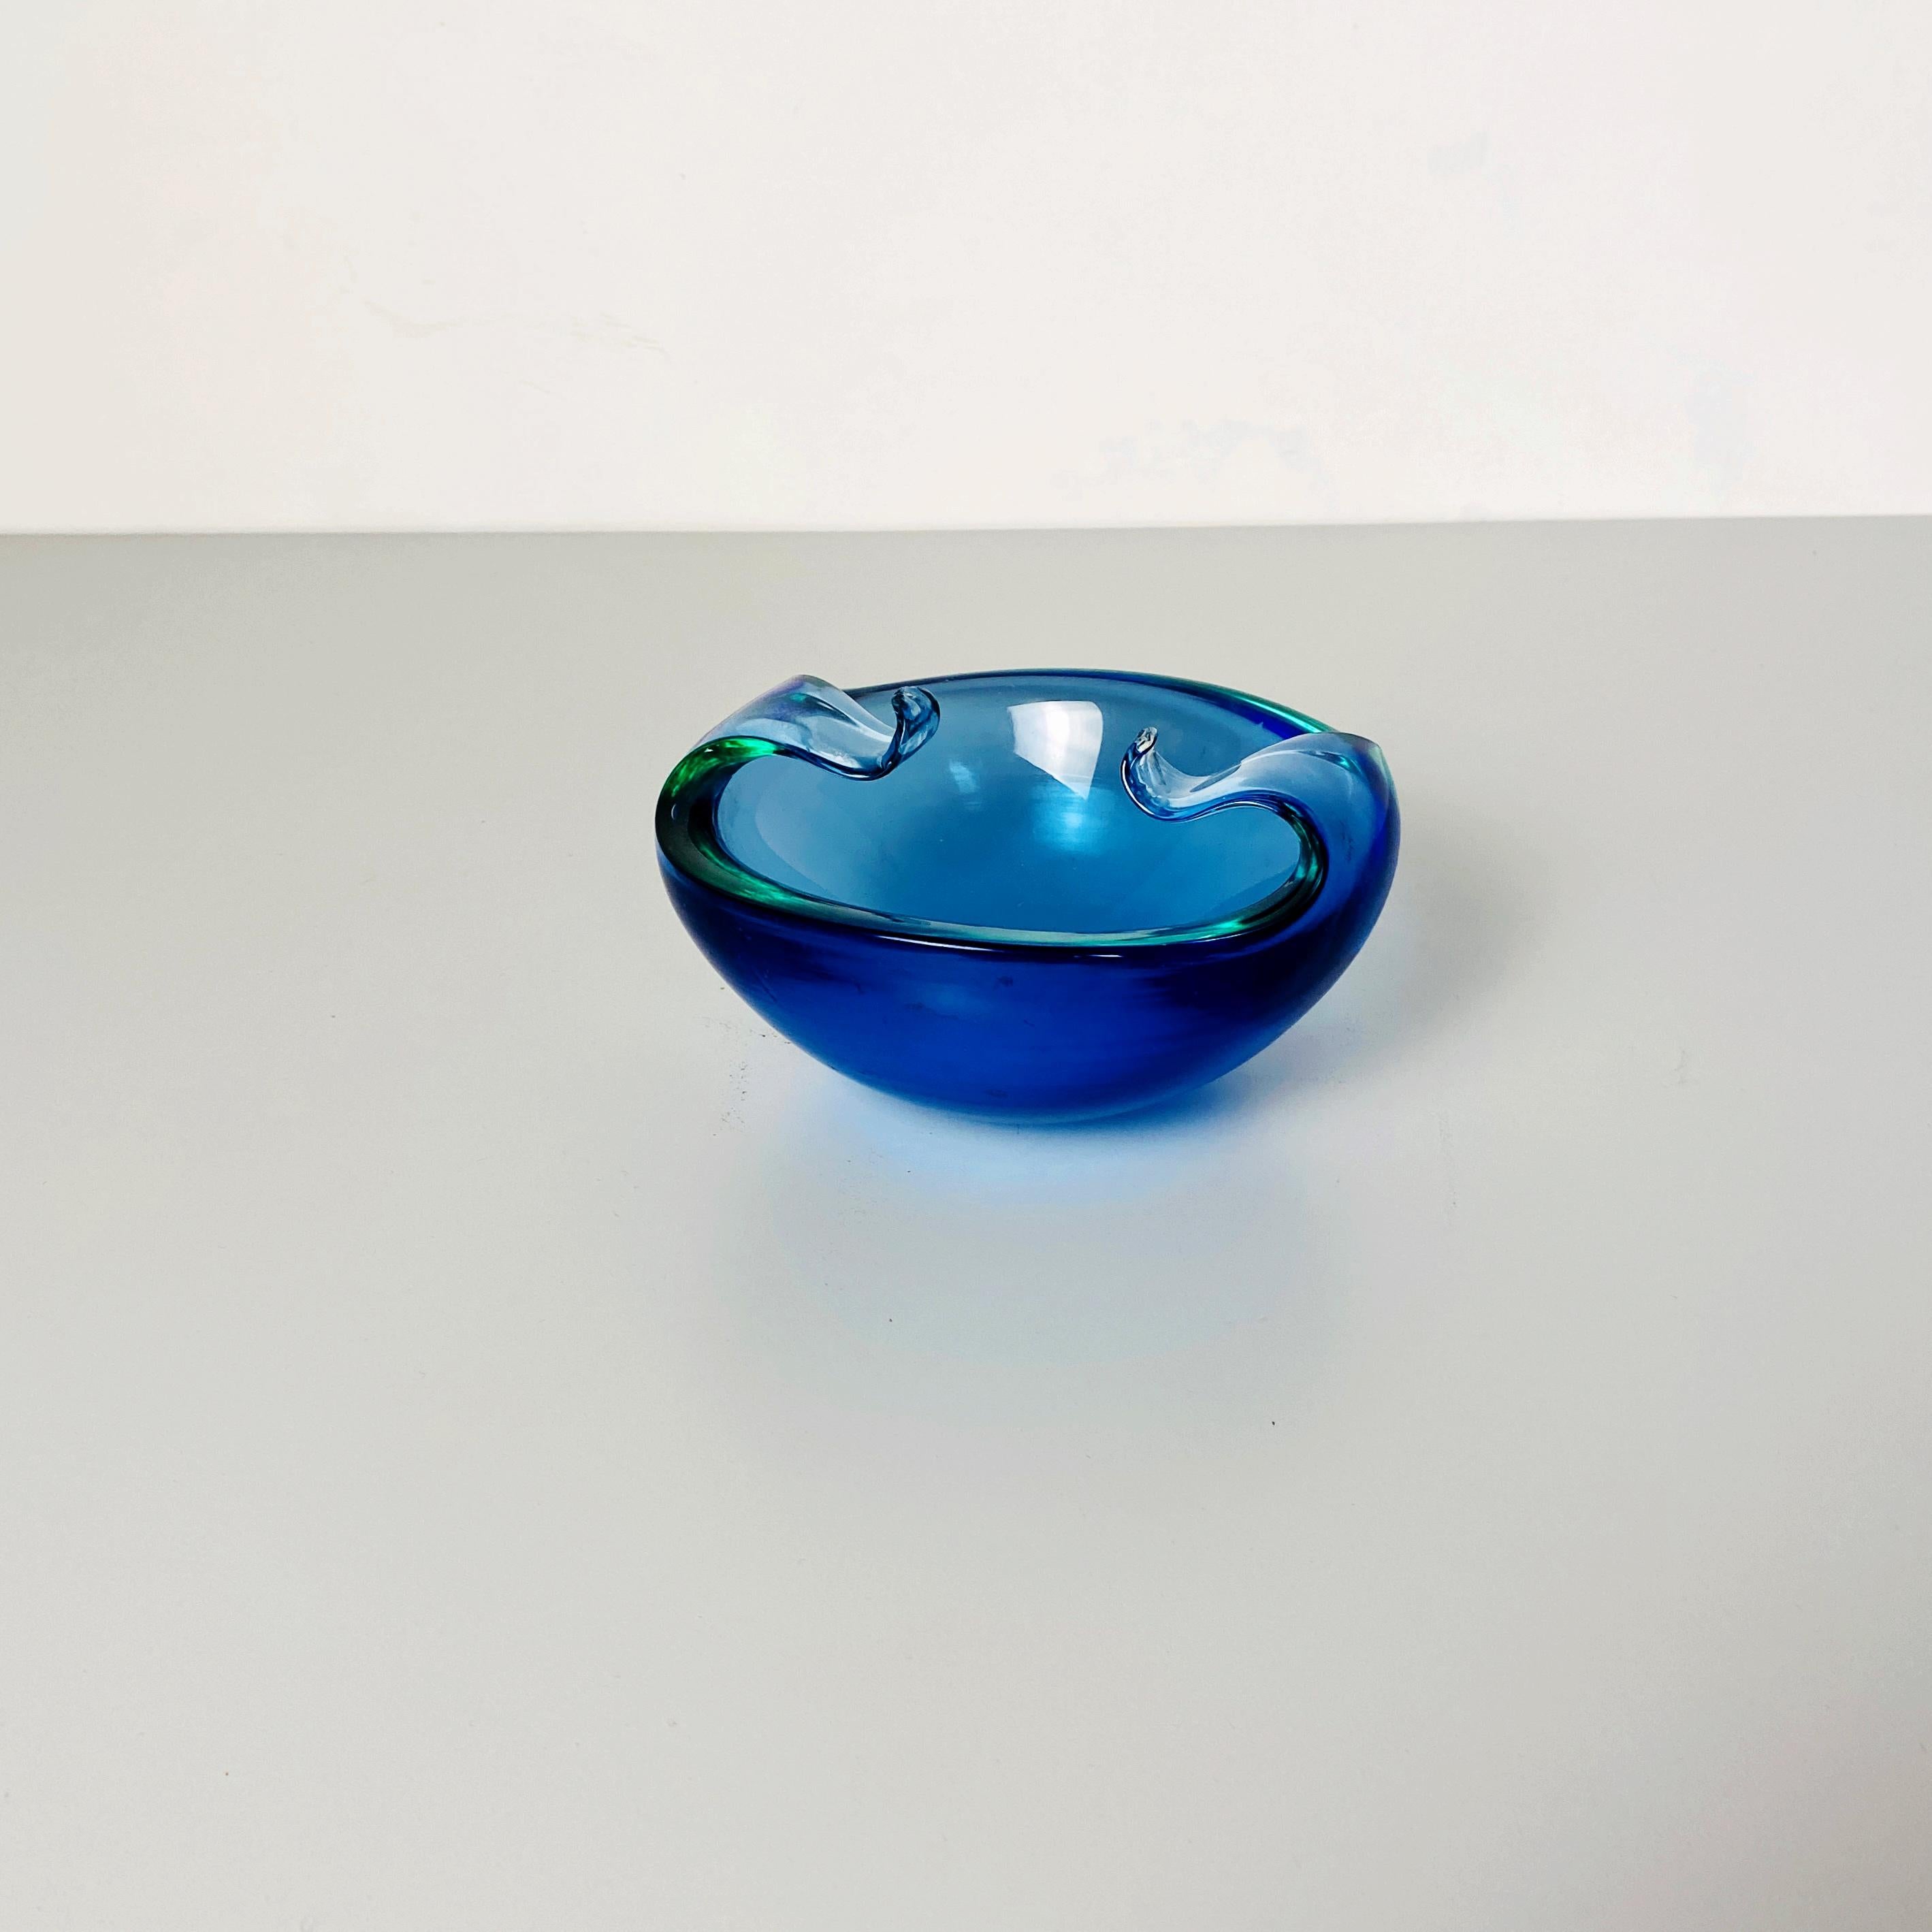 Italian Mid-Century Modern Murano Glass Object Holder with Curled Arms, 1970s For Sale 6